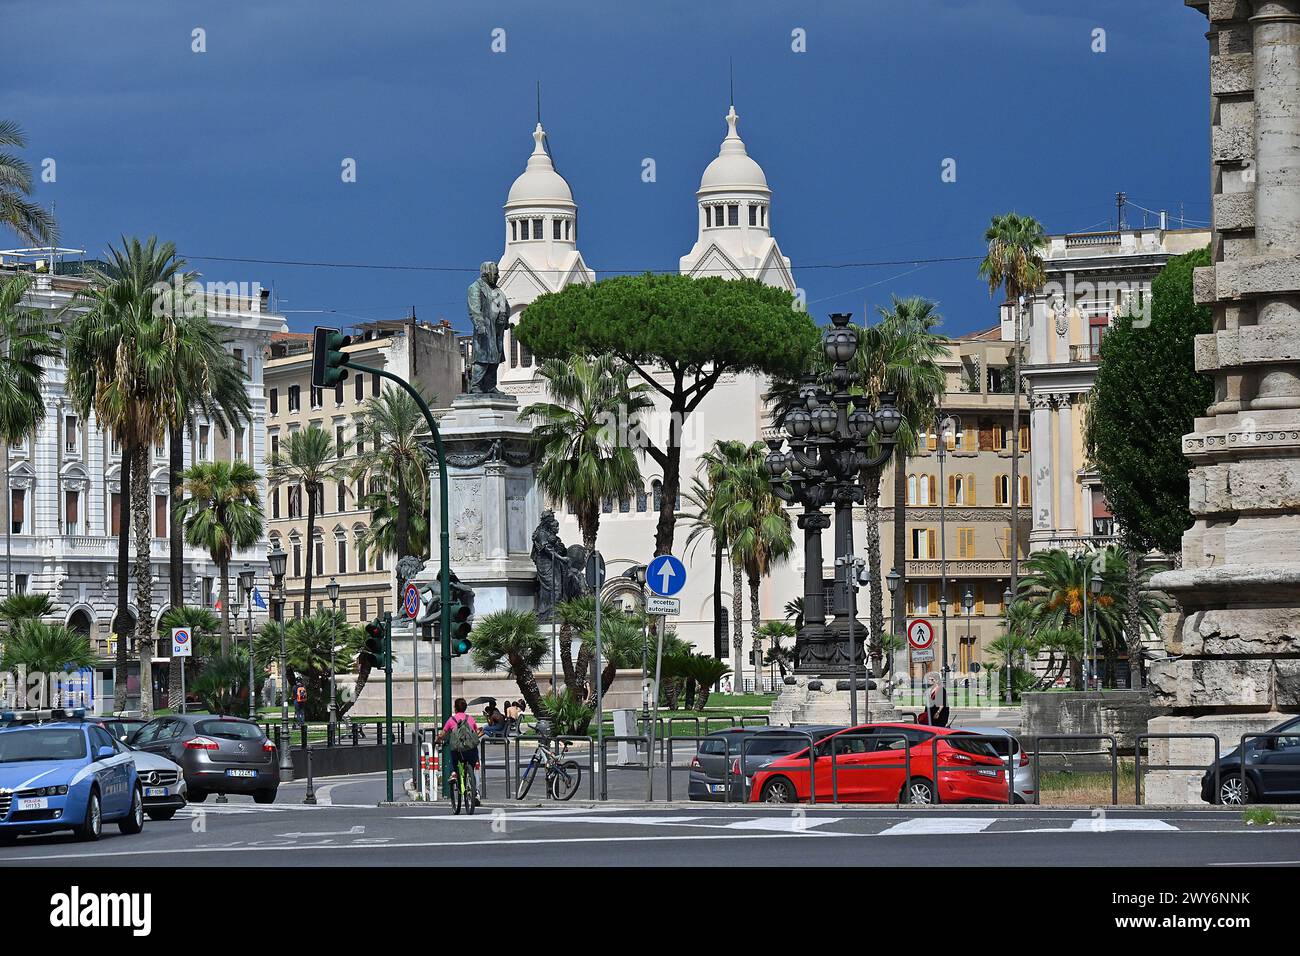 Italy, Rome: “Piazza Cavour” square in the district of Prati. Traffic near the central garden with a bronze statue of Camillo Benso, Count of Cavour. Stock Photo